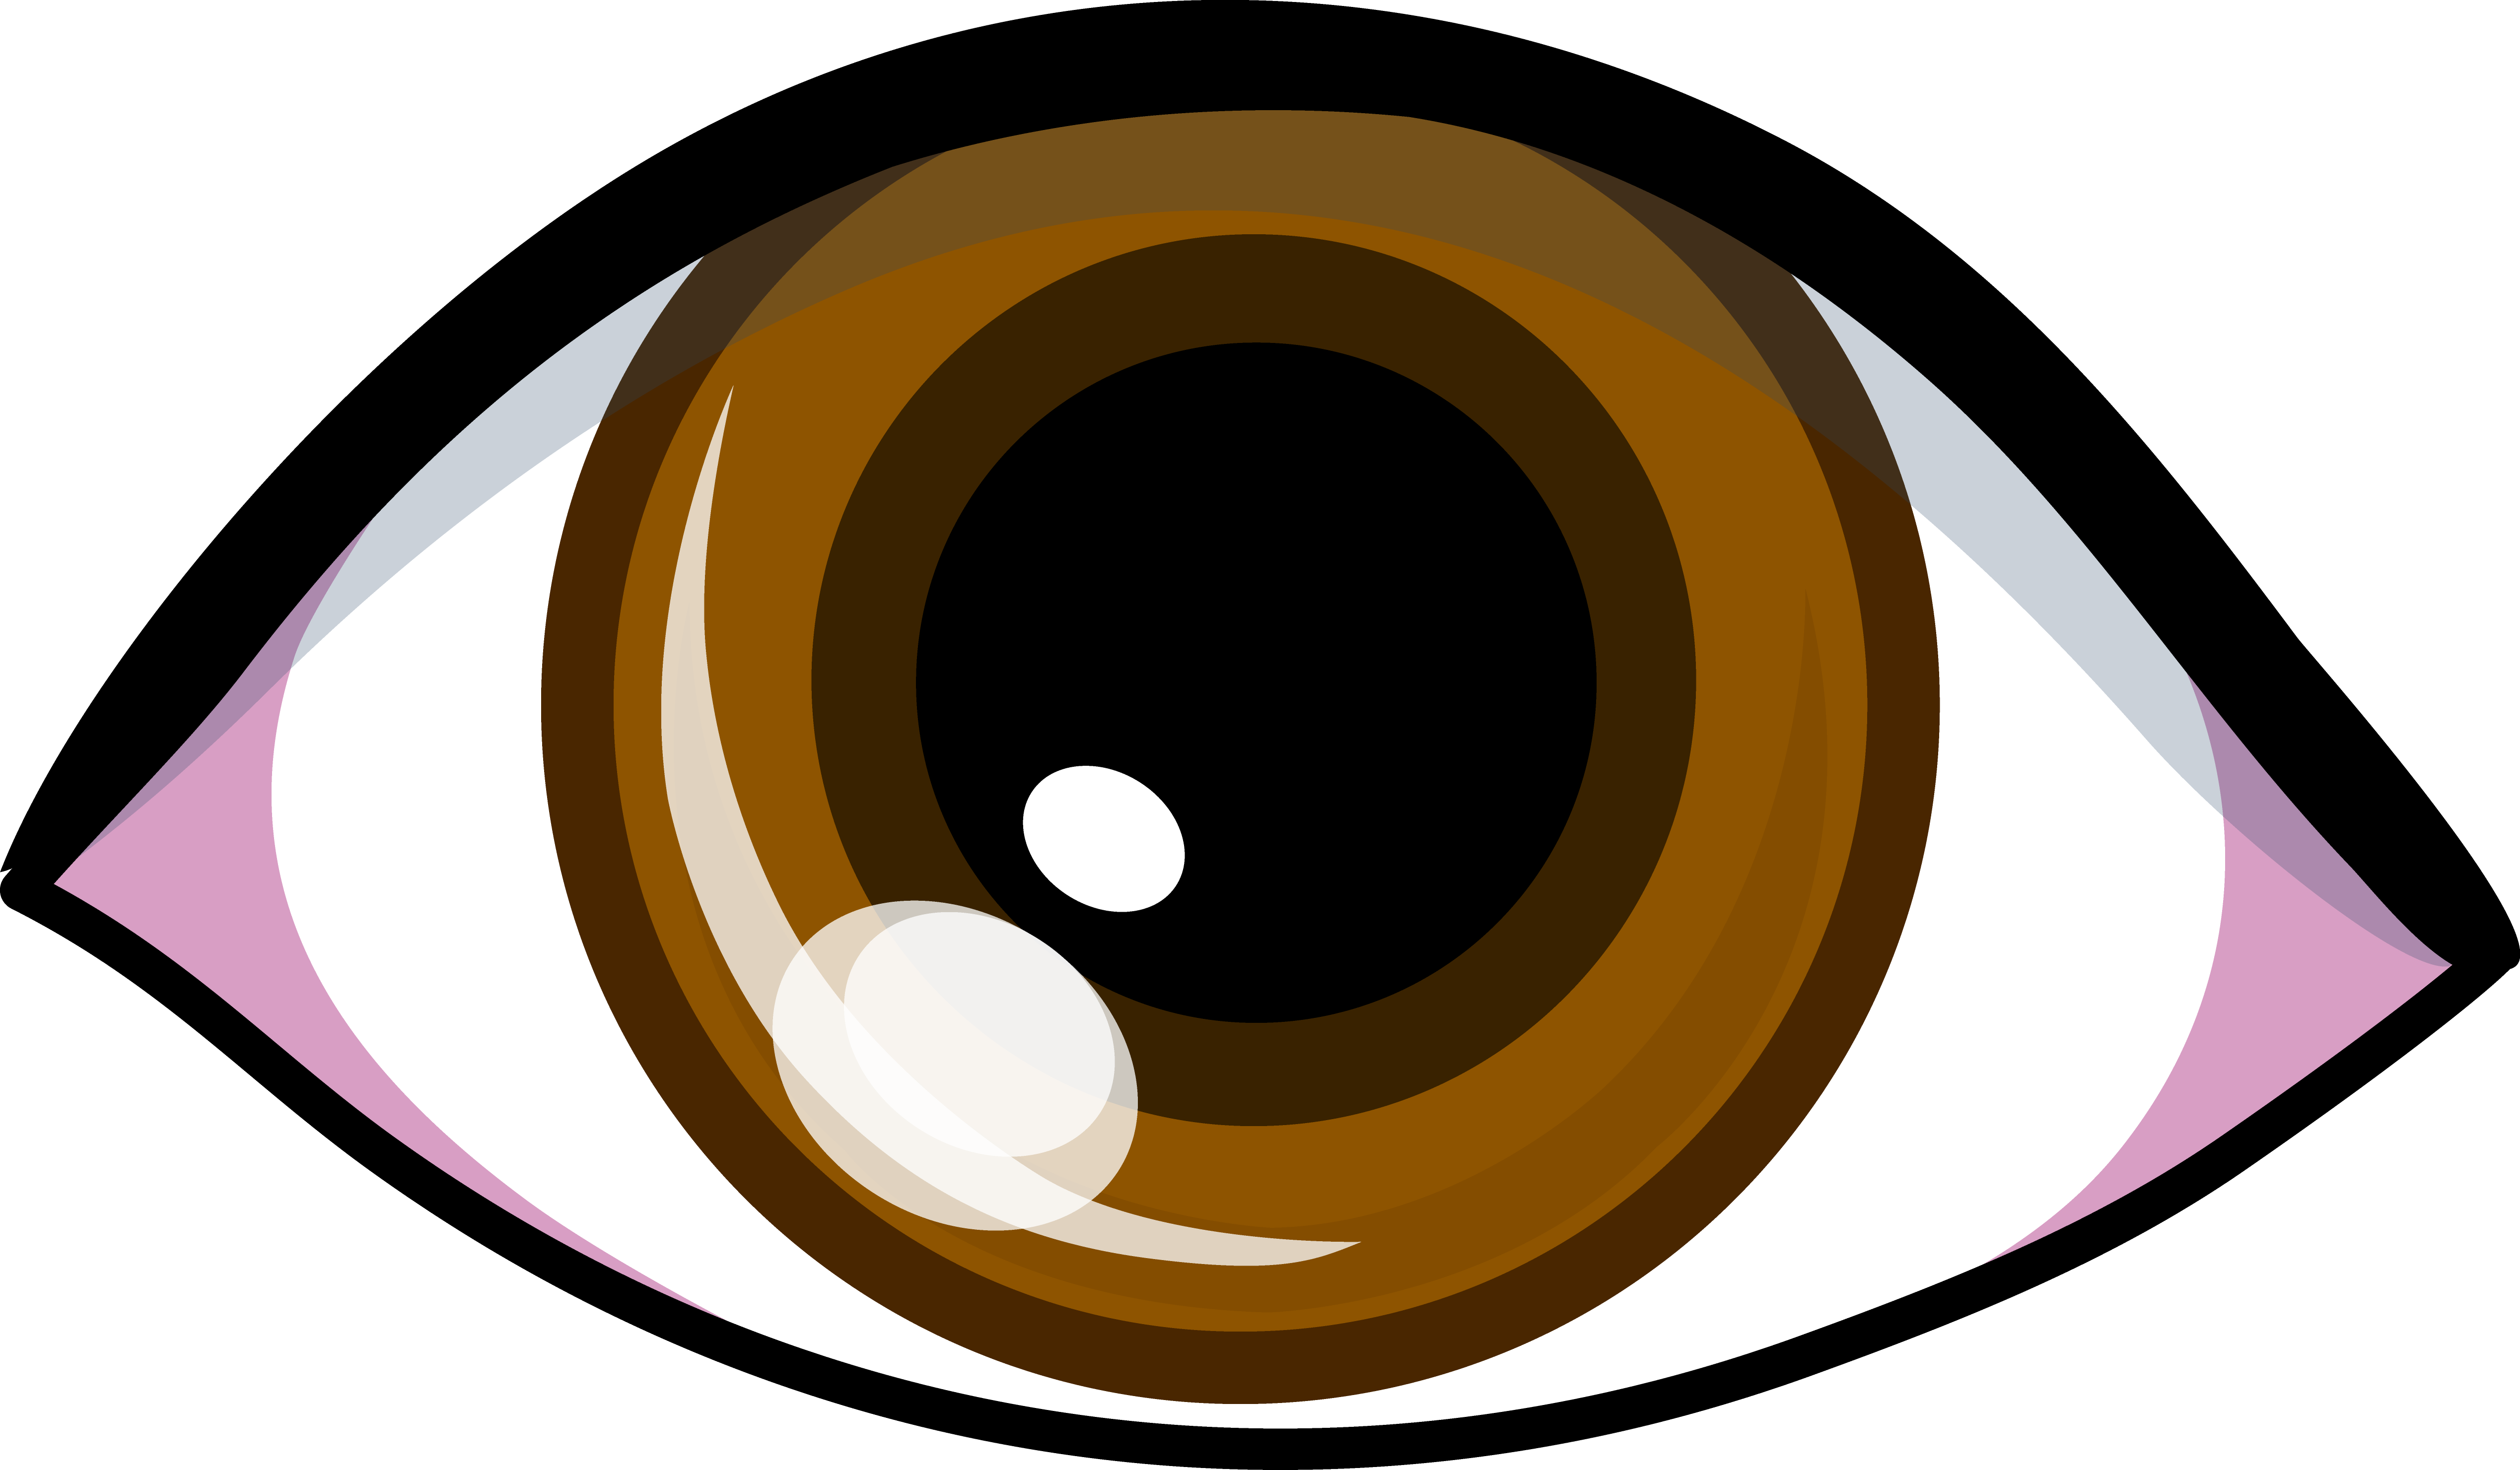 Eyes Clipart Png